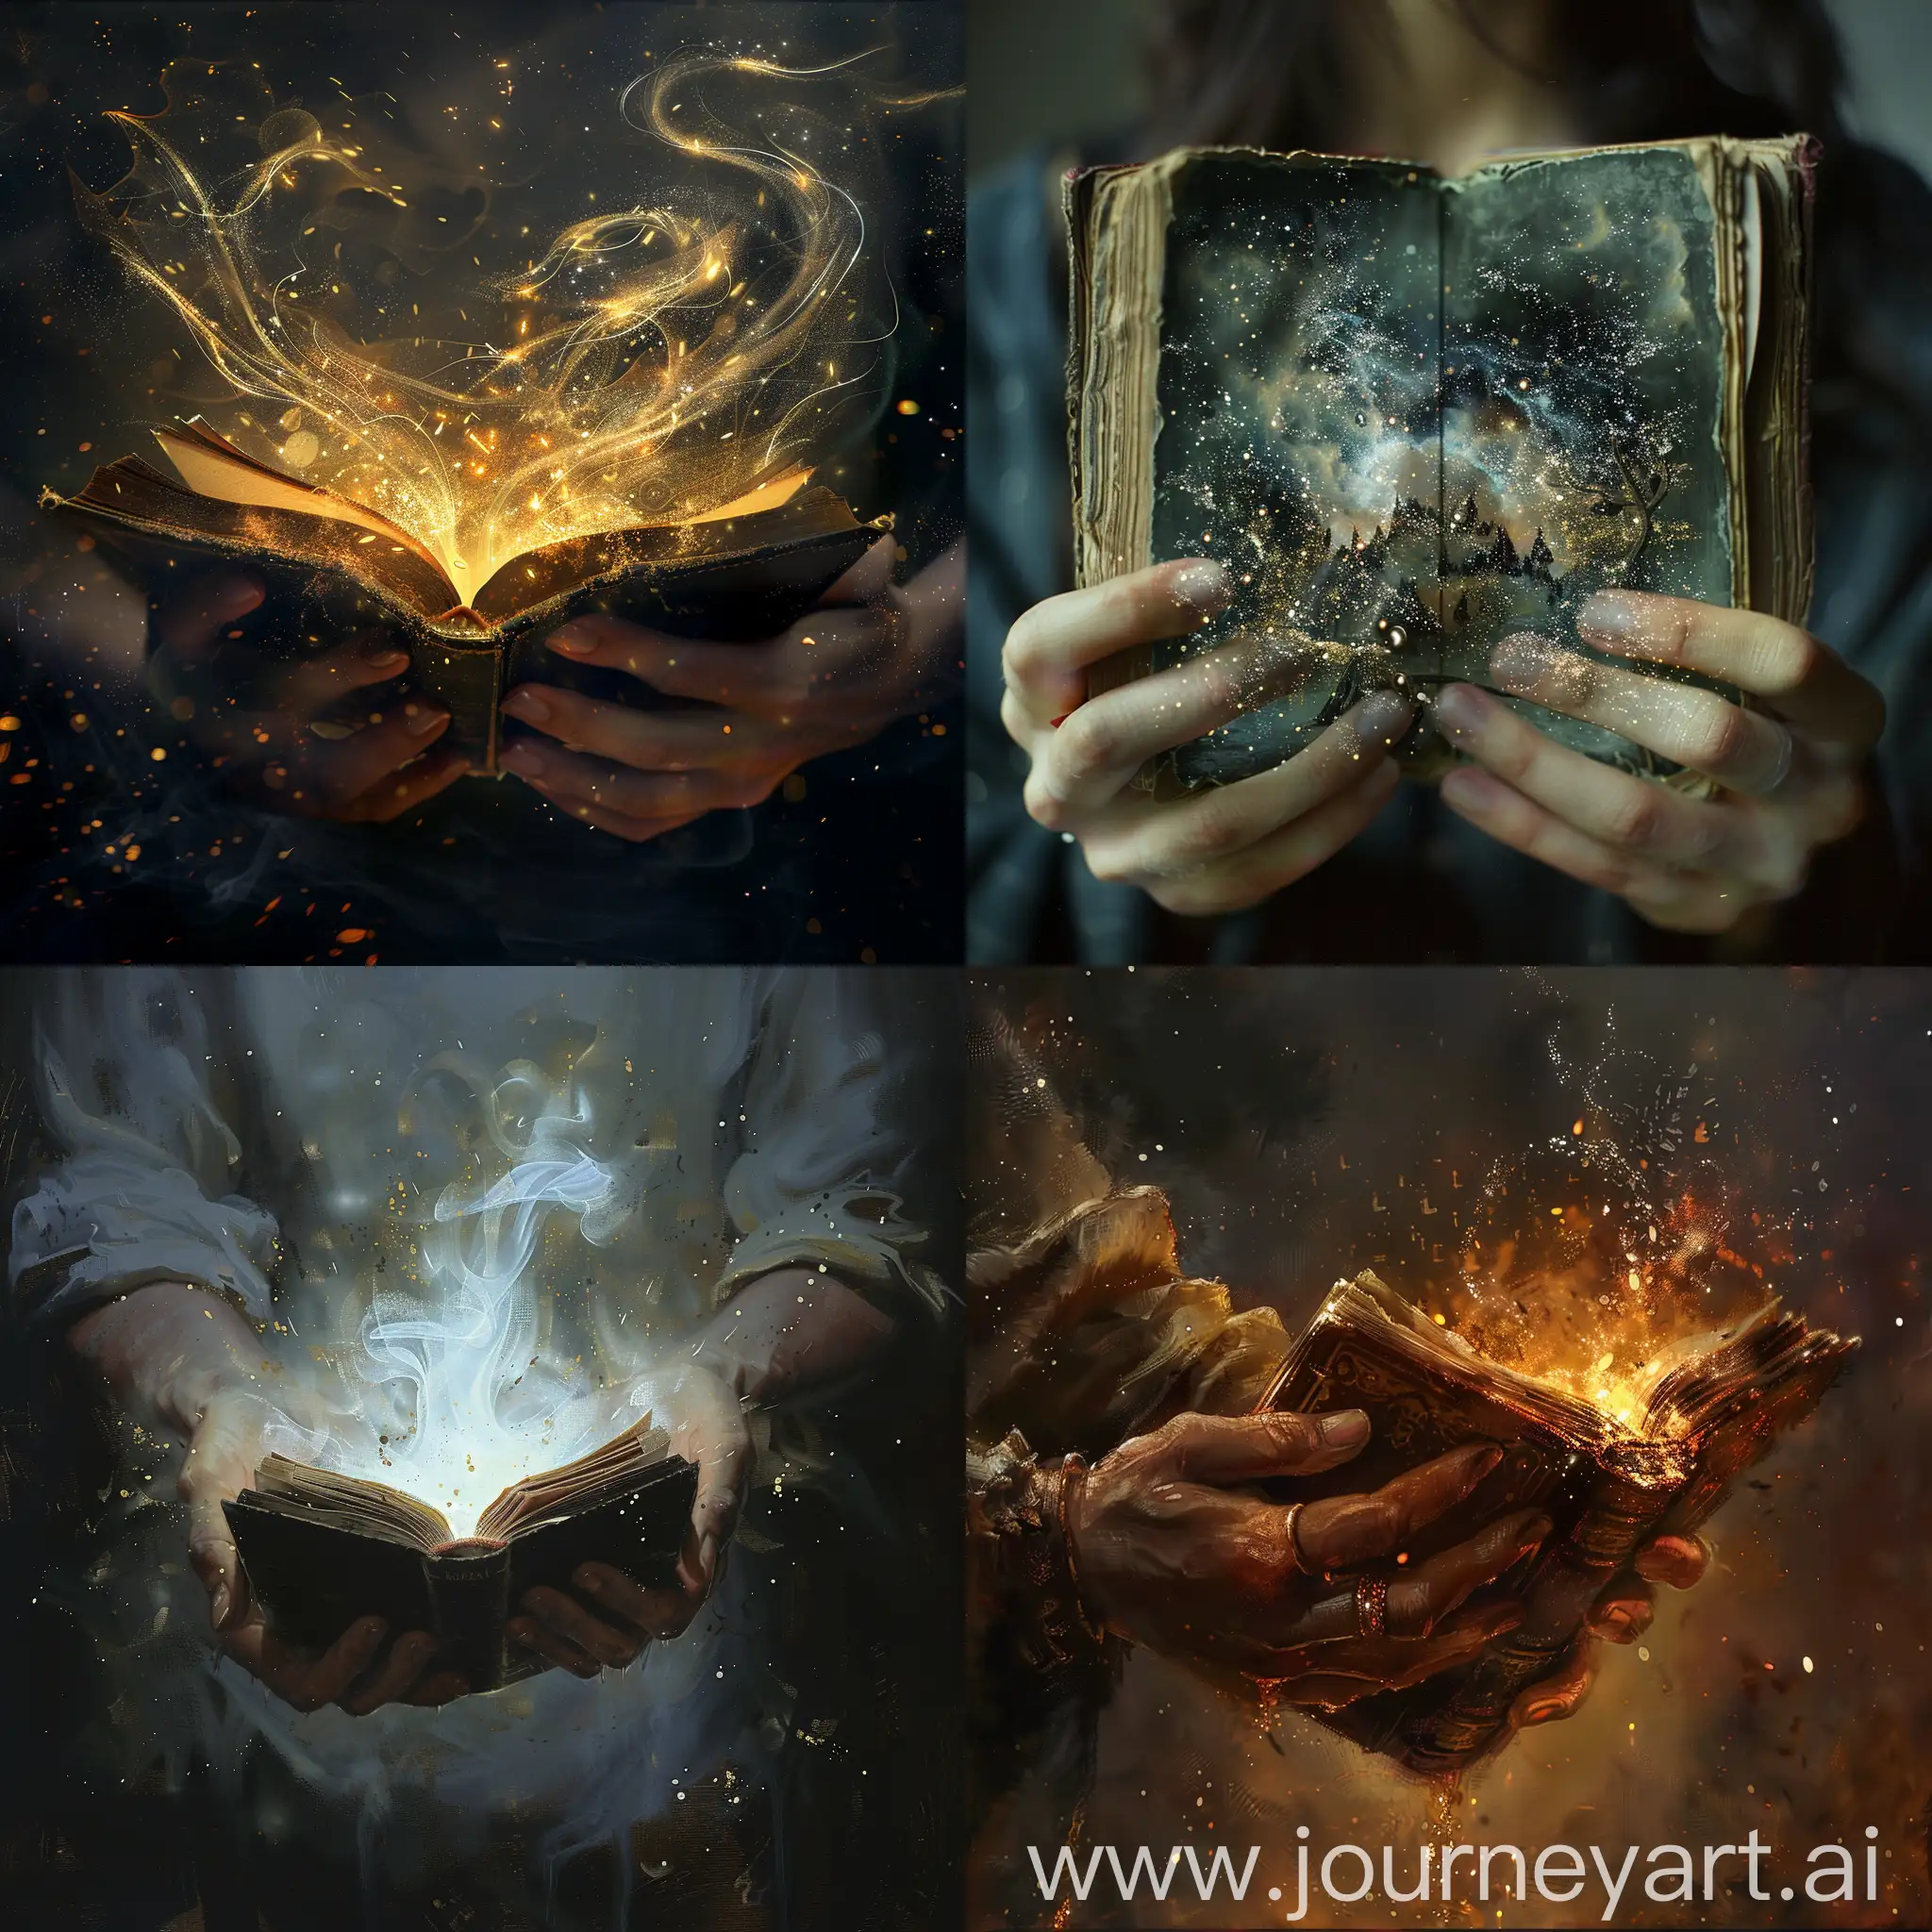 Fantasy-Book-in-Hands-Magical-Adventure-and-Wonder